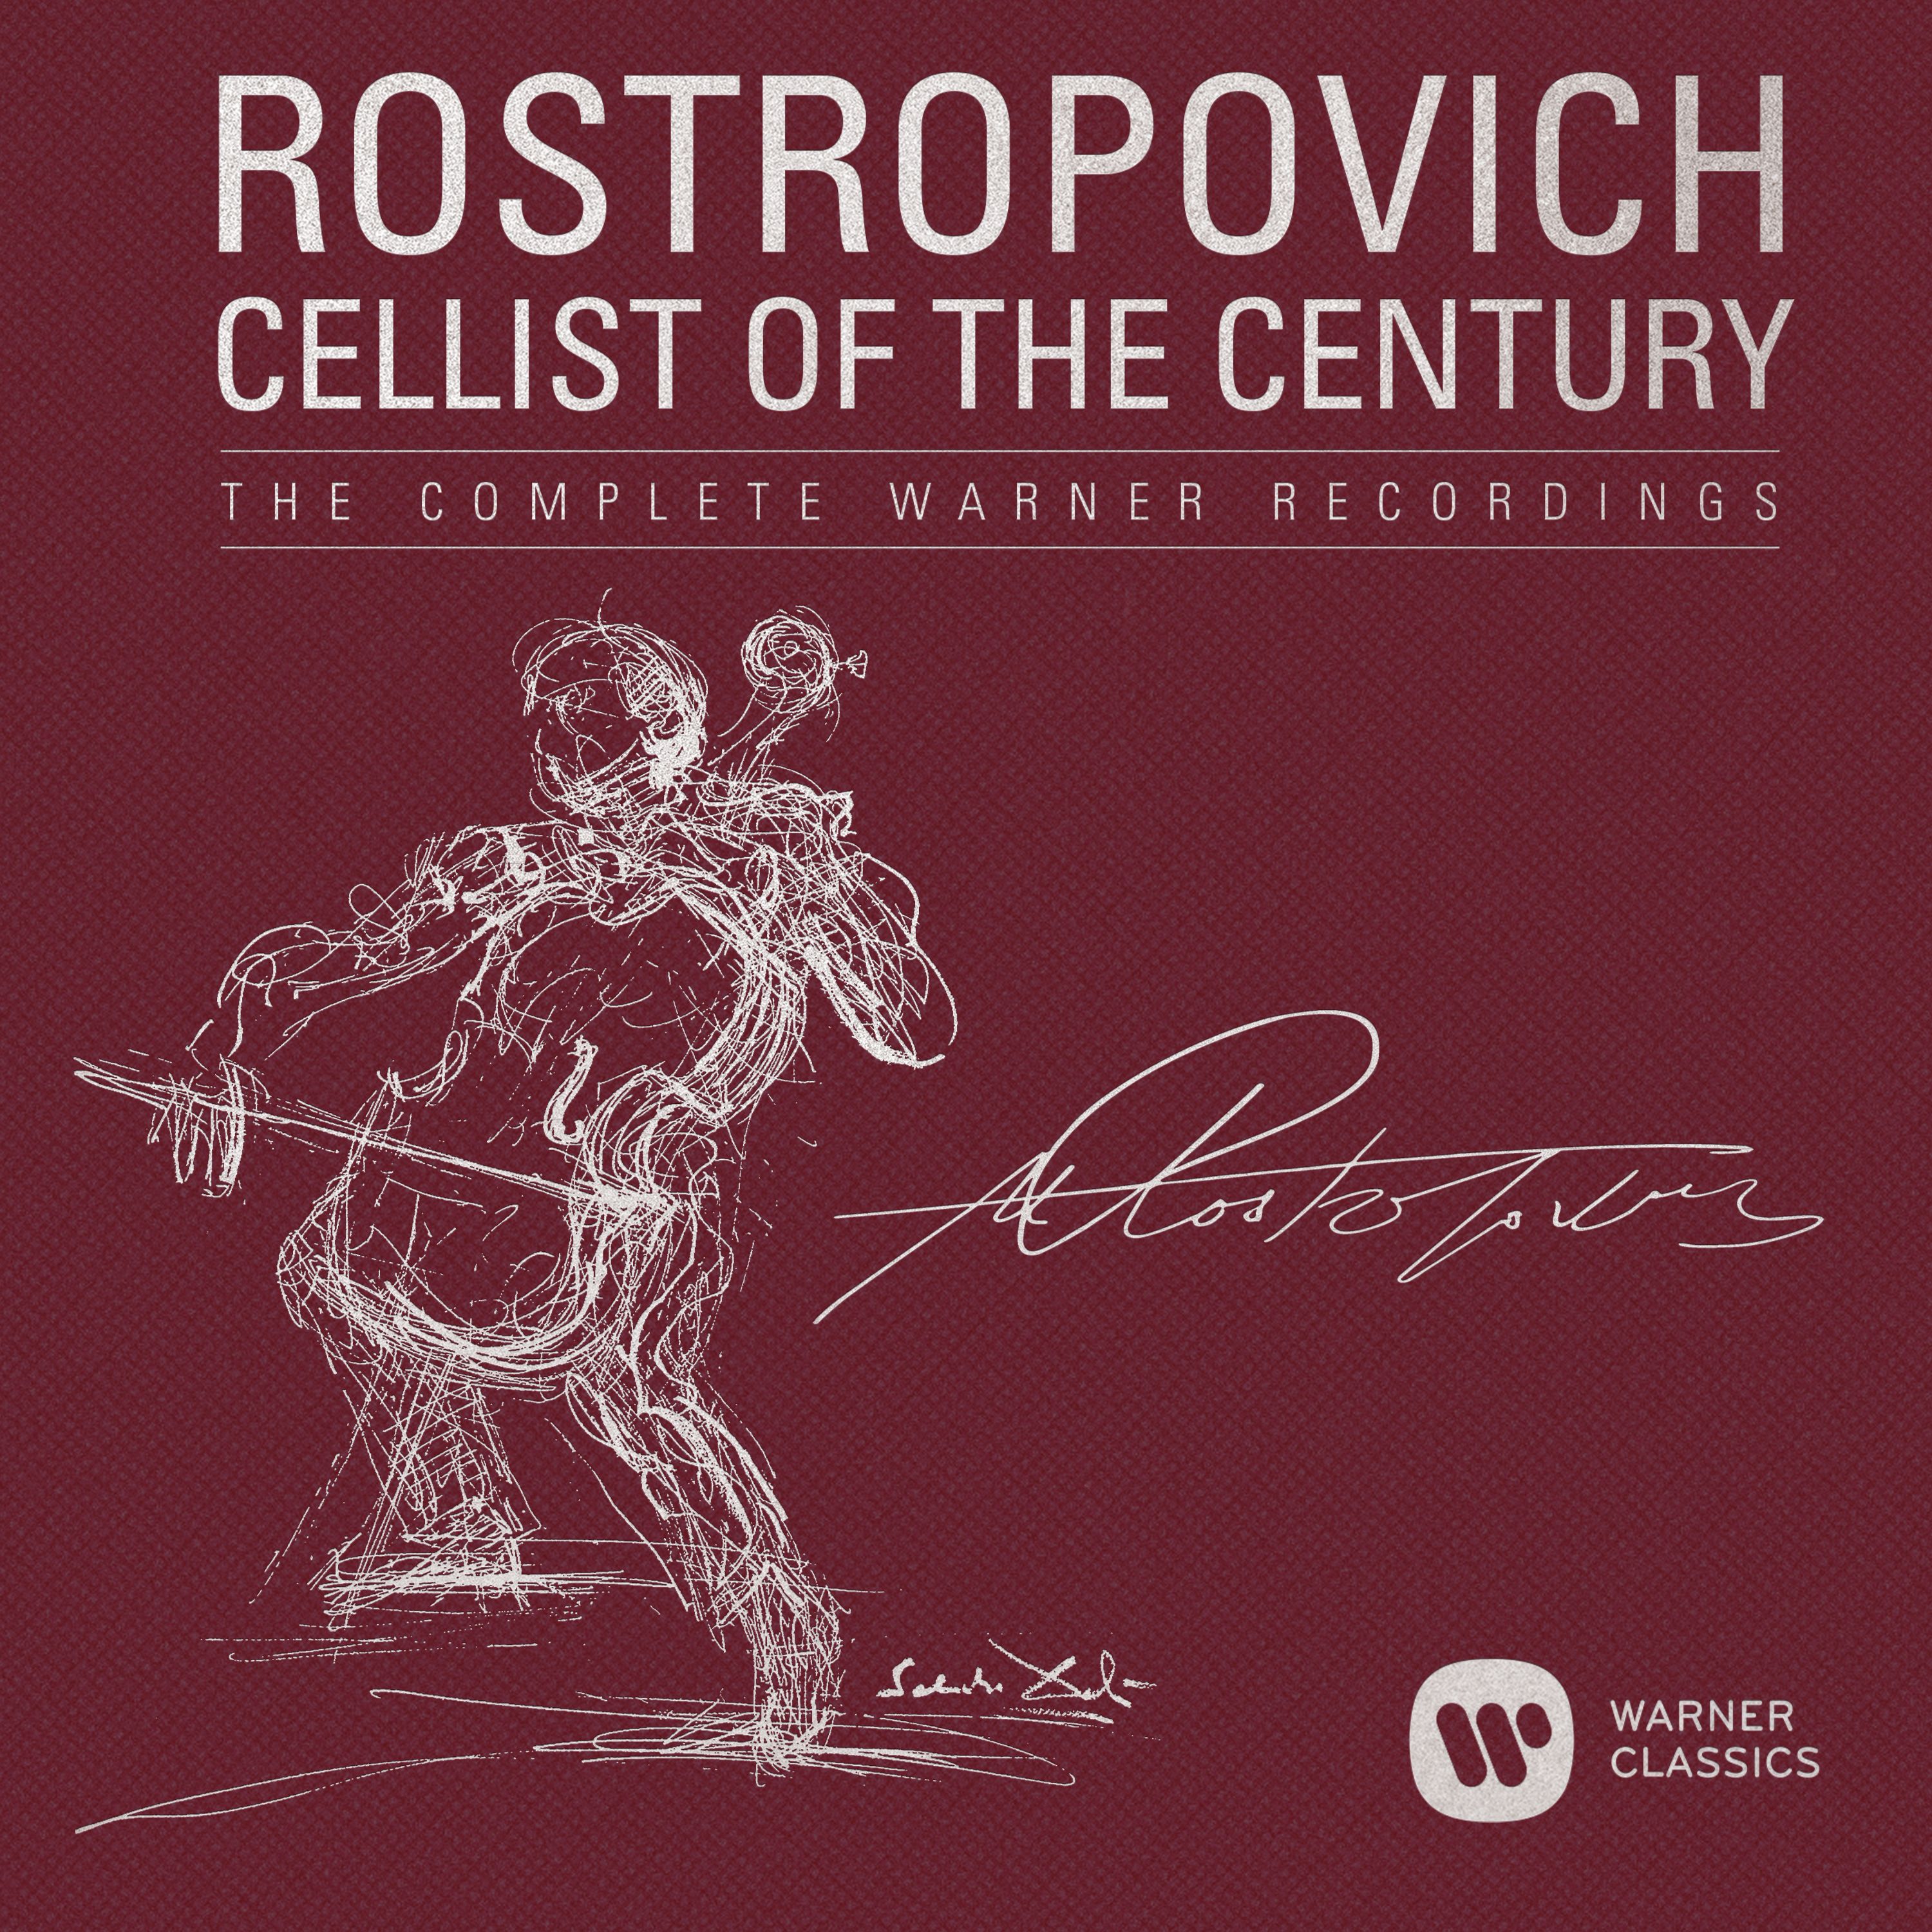 Rostropovich - Cellist of the Century - The Complete Warner Recordings